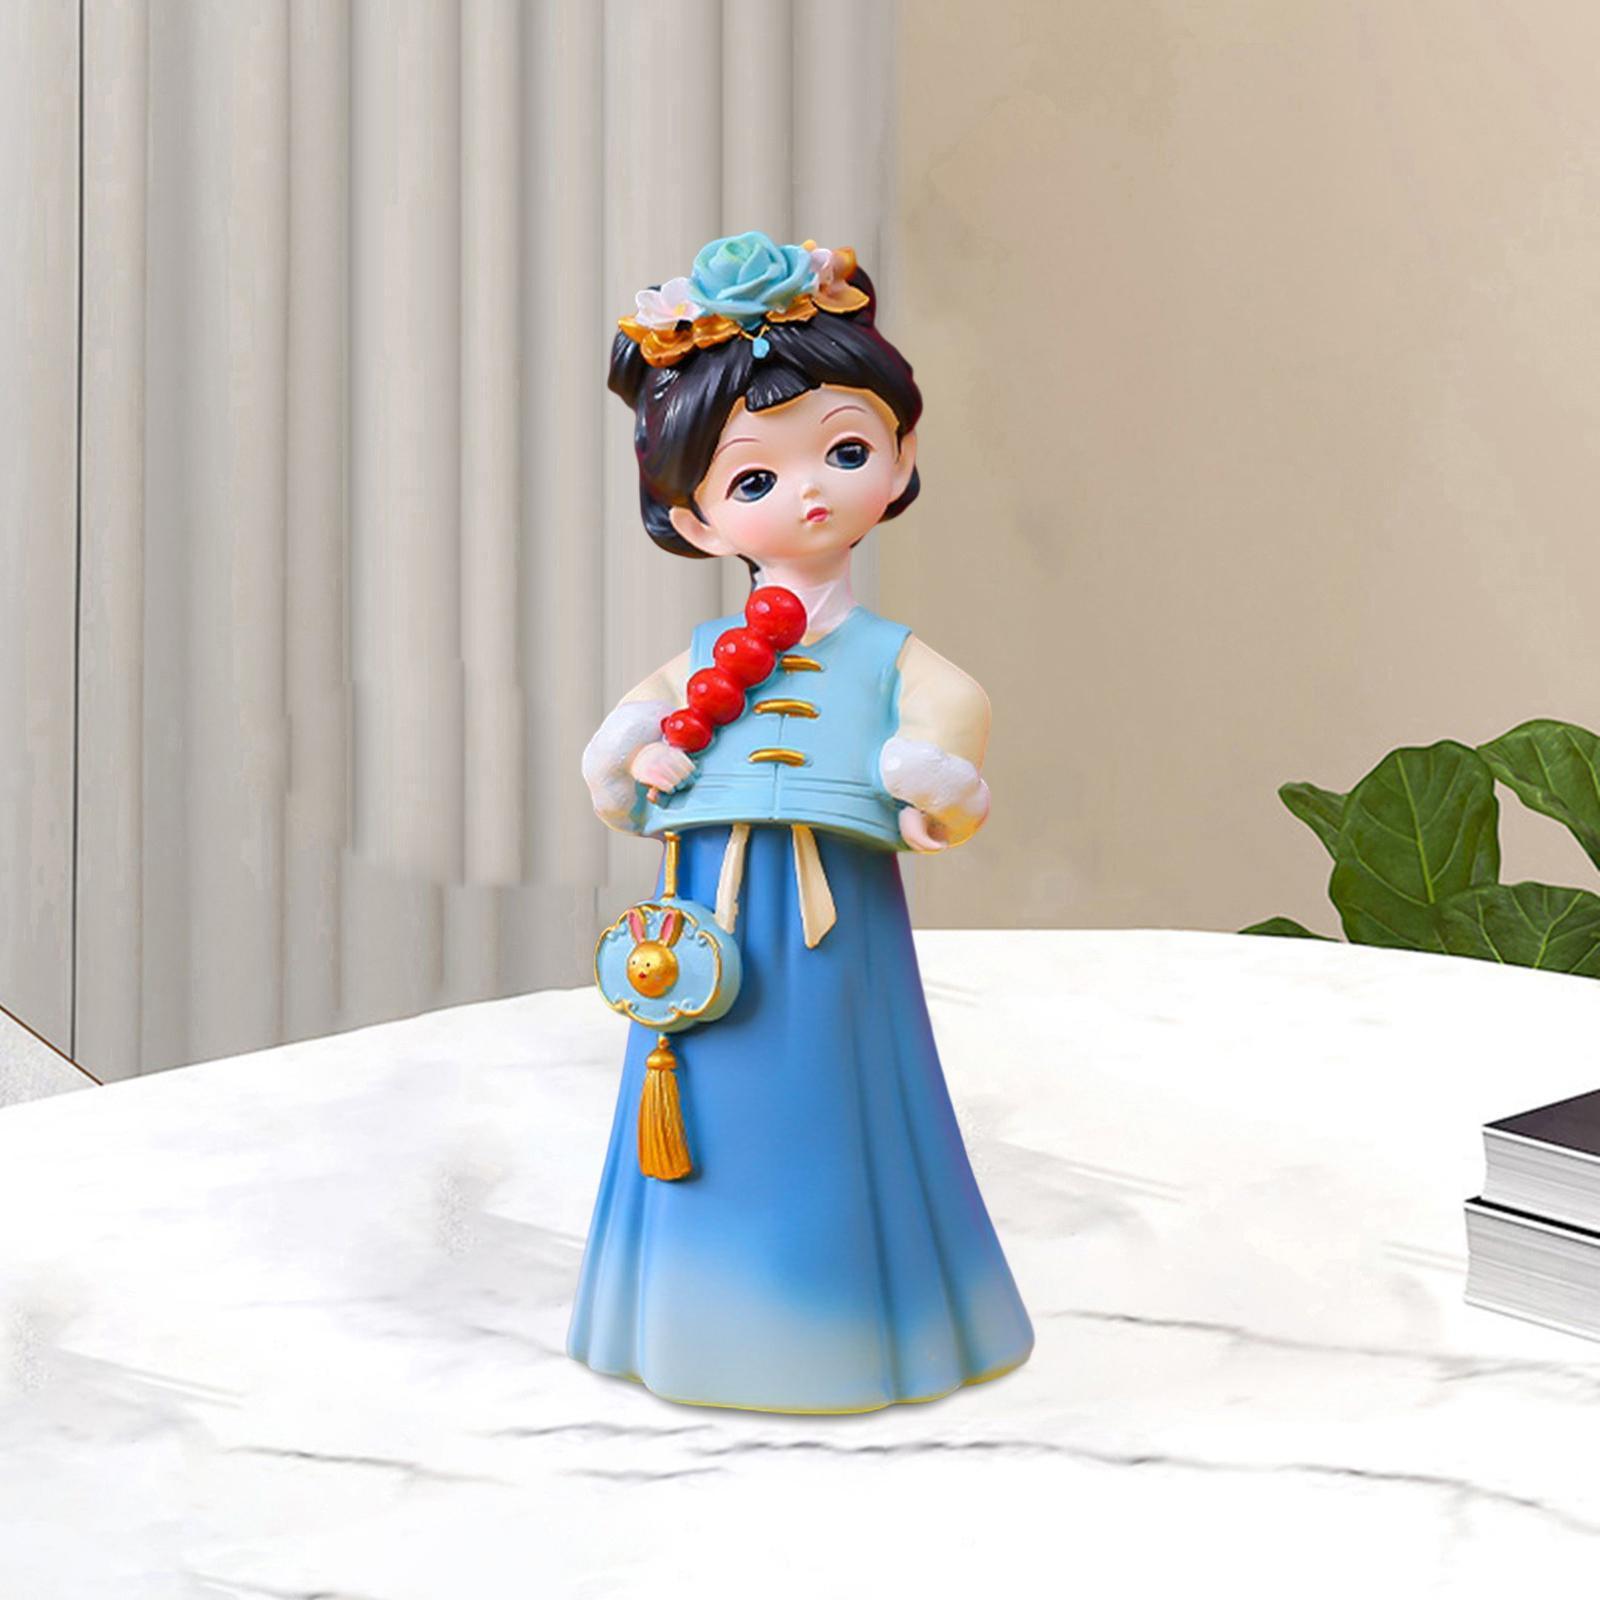 Traditional Chinese Girls Statue Sculpture Table Centerpiece Collectible Home Resin Figurines for Cabinet Entryway Living Room Party Wedding